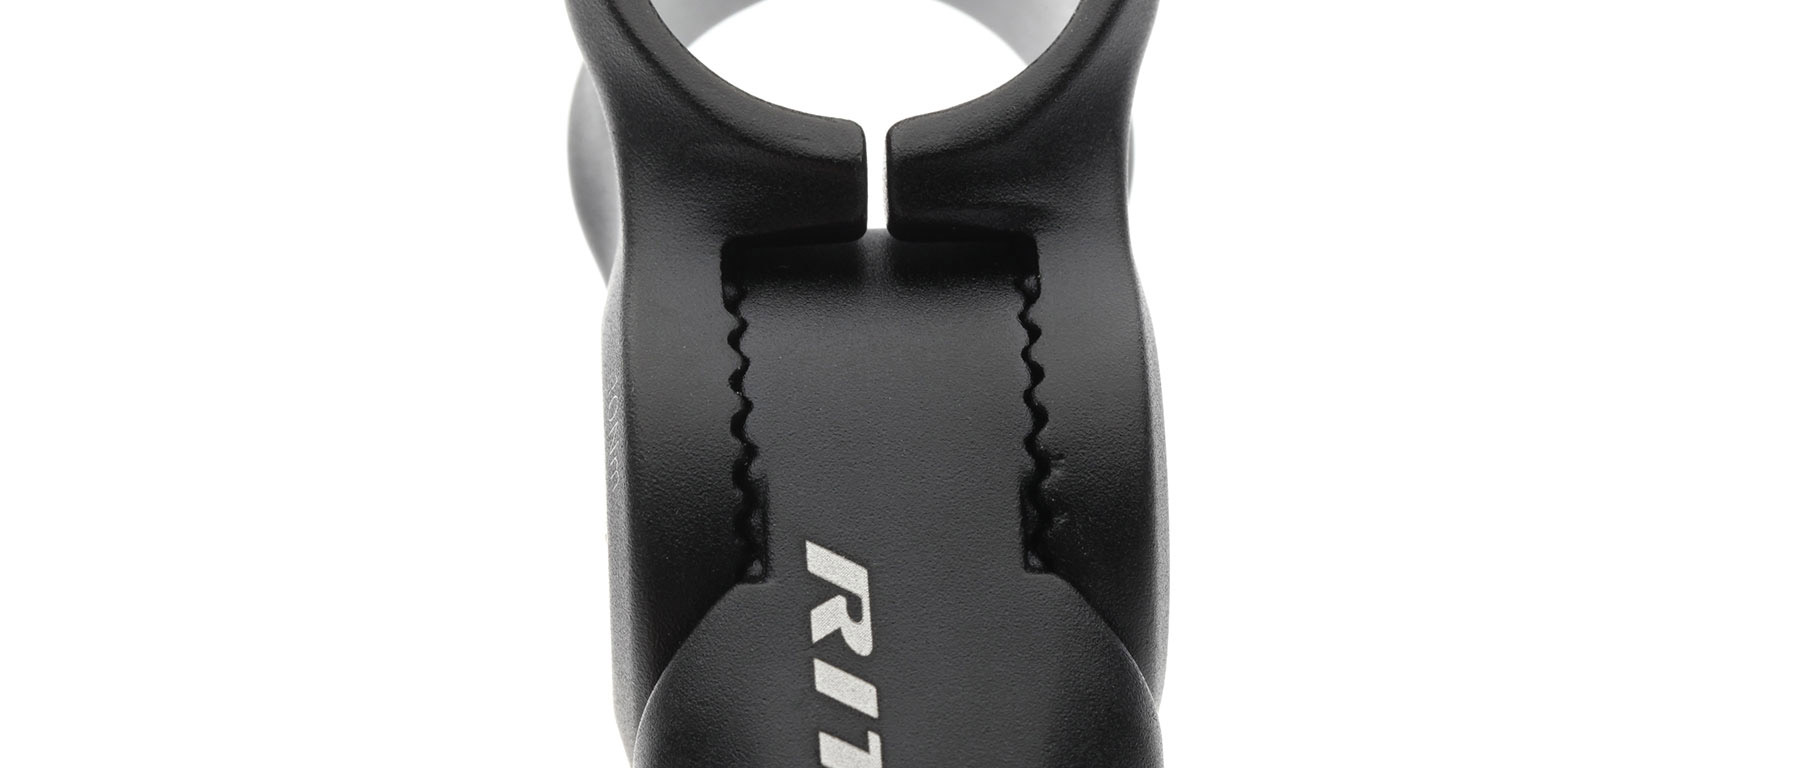 Ritchey Road 4-Axis Adjustable Stem